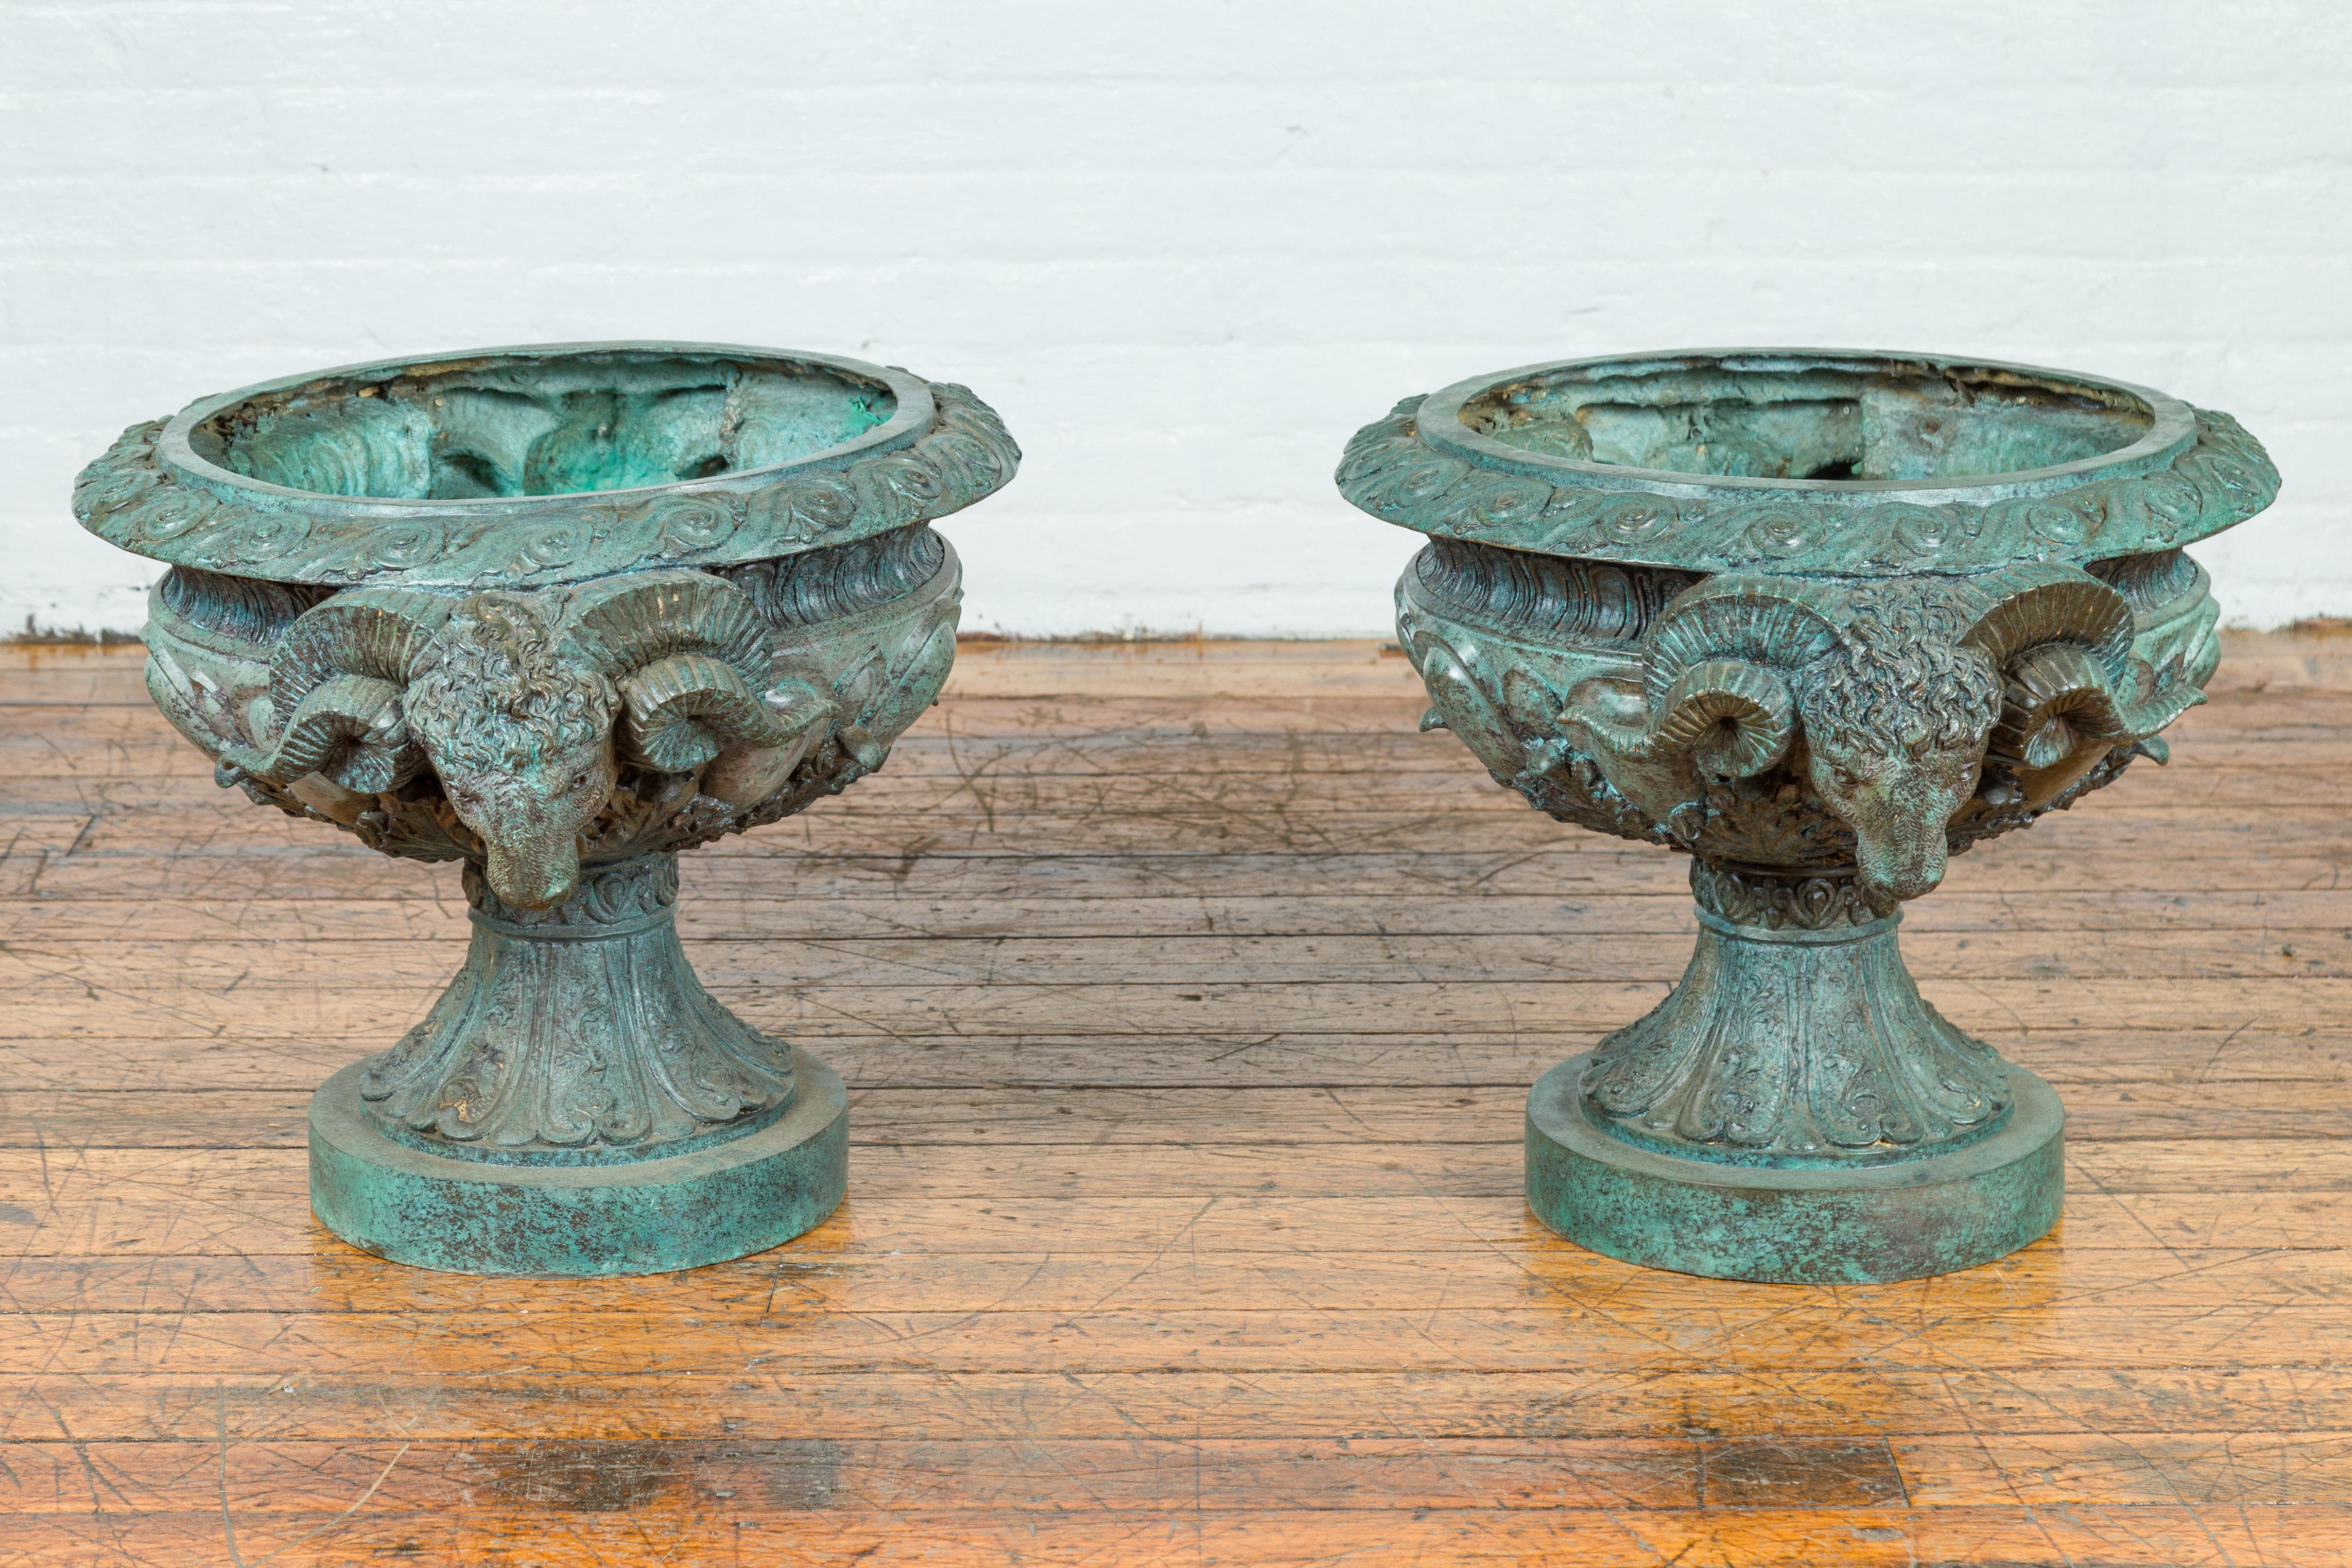 Greco Roman Style Vintage Verde Patina Bronze Urns with Rams' Heads, Sold Each 9